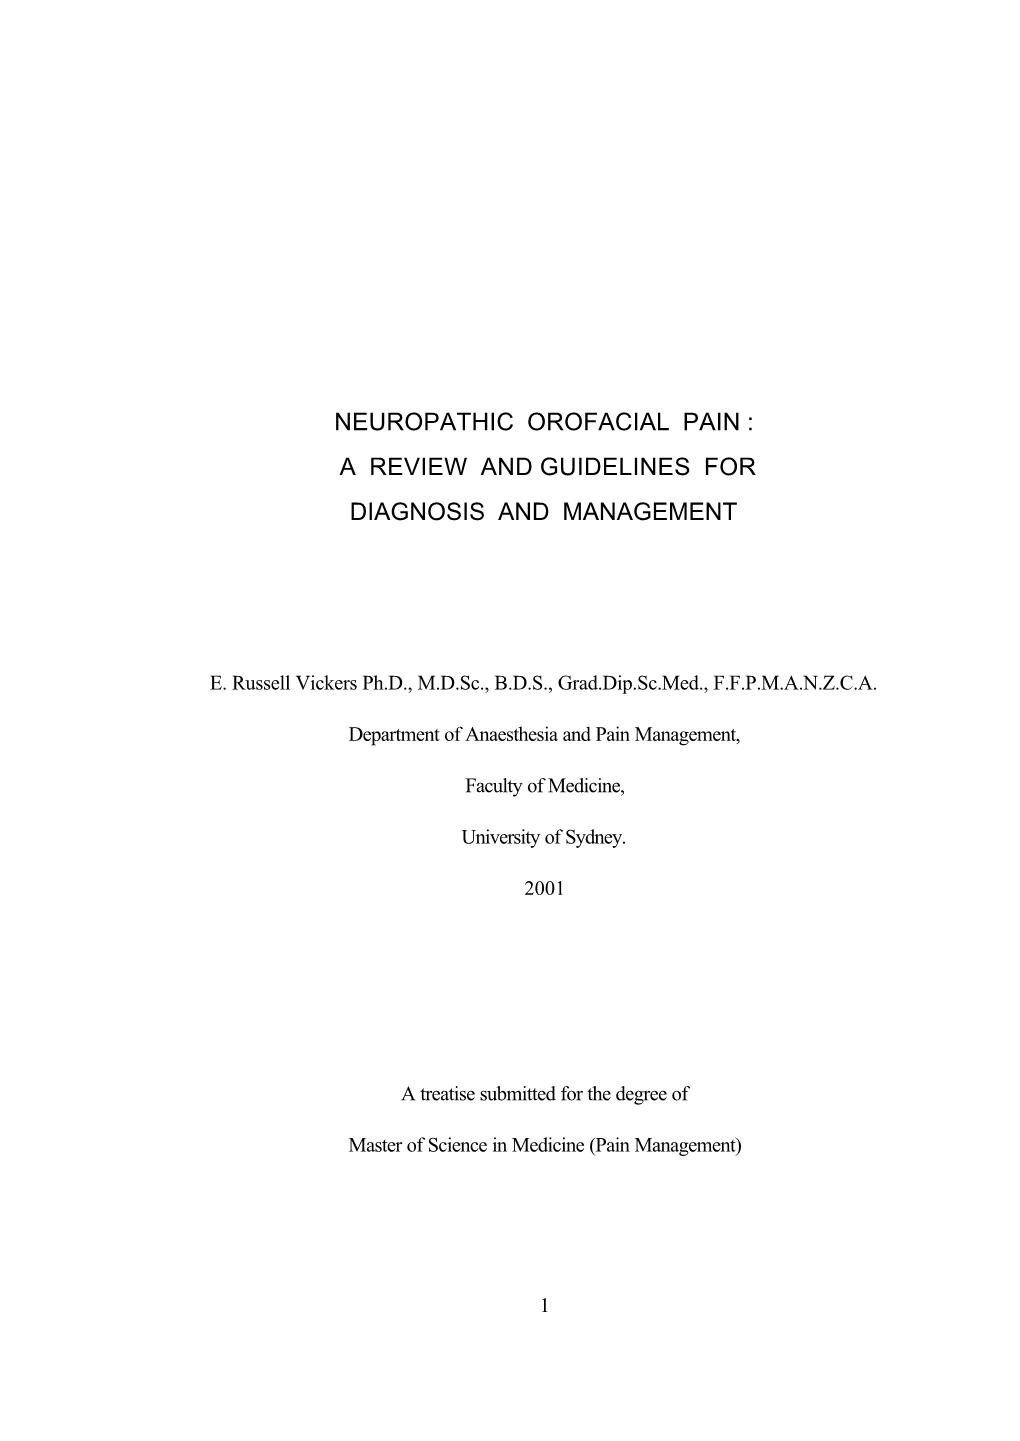 Neuropathic Orofacial Pain : a Review and Guidelines for Diagnosis and Management